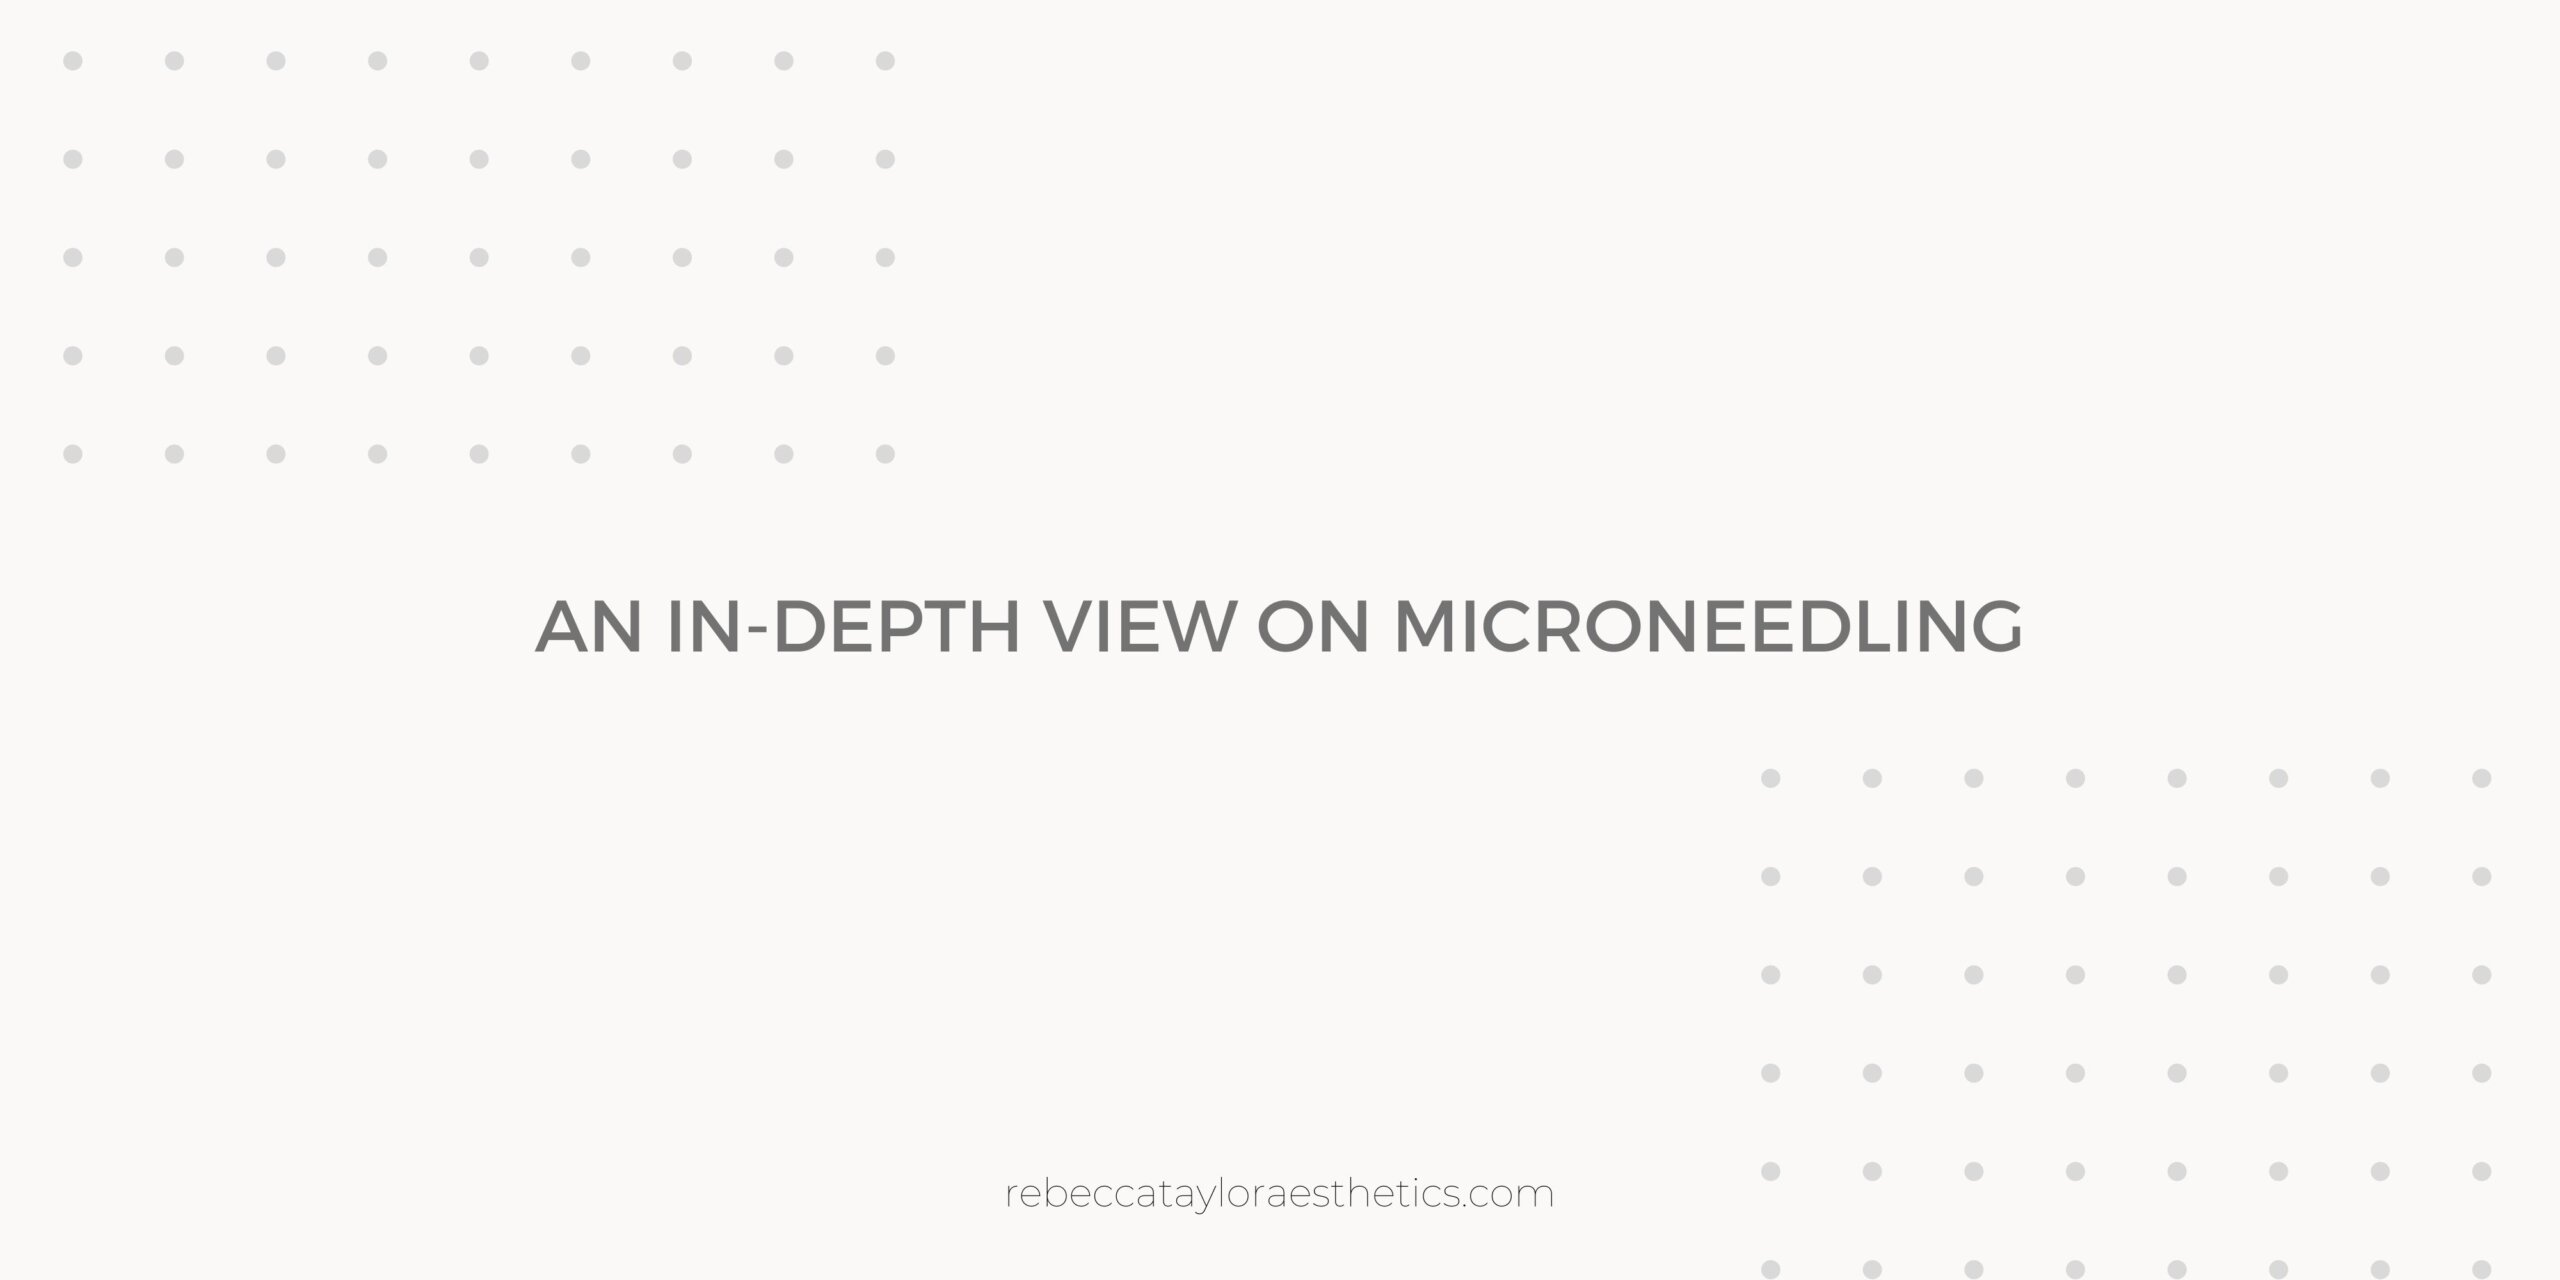 Header graphic title for Microneedling